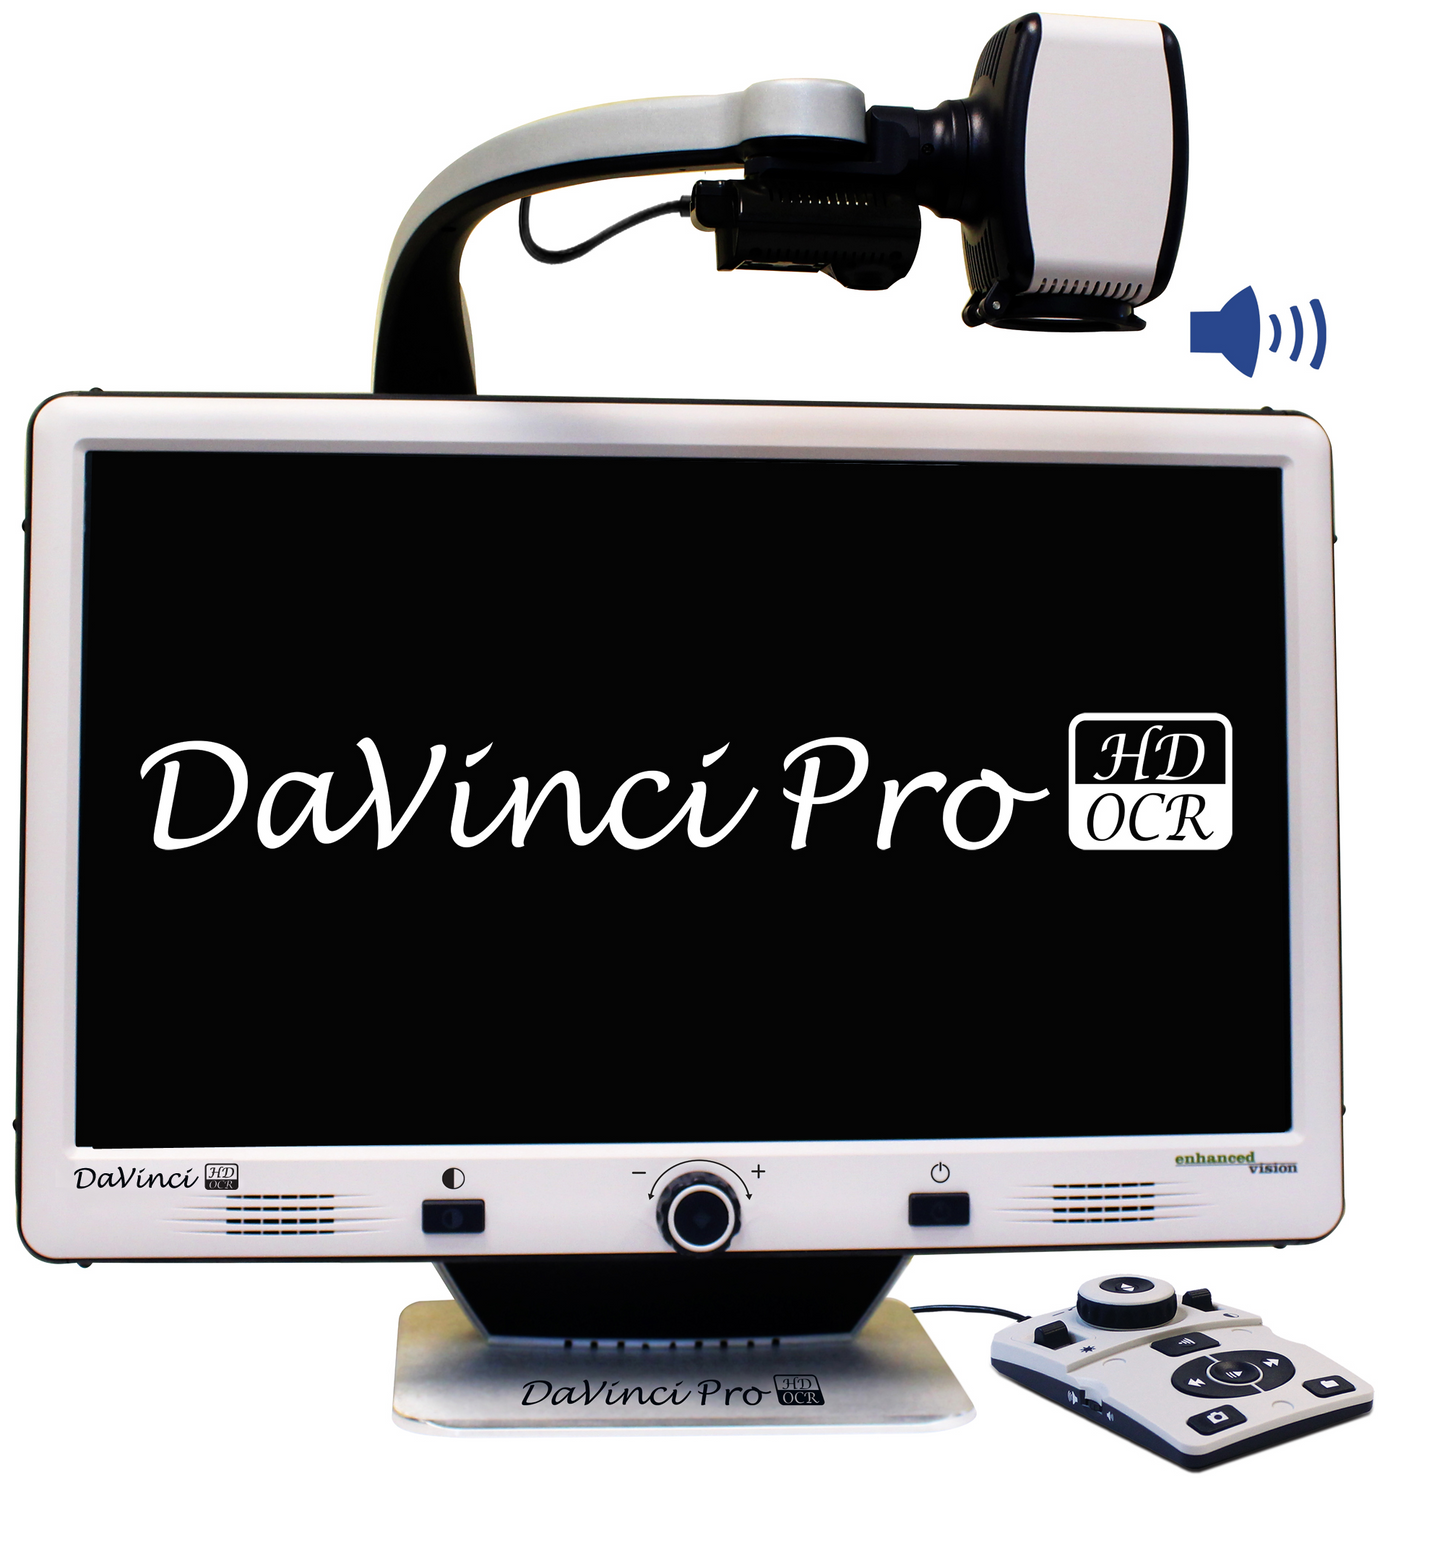 DaVinci Pro CCTV electronic magnifier for independent living. There is a white framed screen with DaVinci Pro written on the front of the black screen background. Above the monitor is a camera which is pointing downwards. There is a remote that controls the camera that can help legally blind